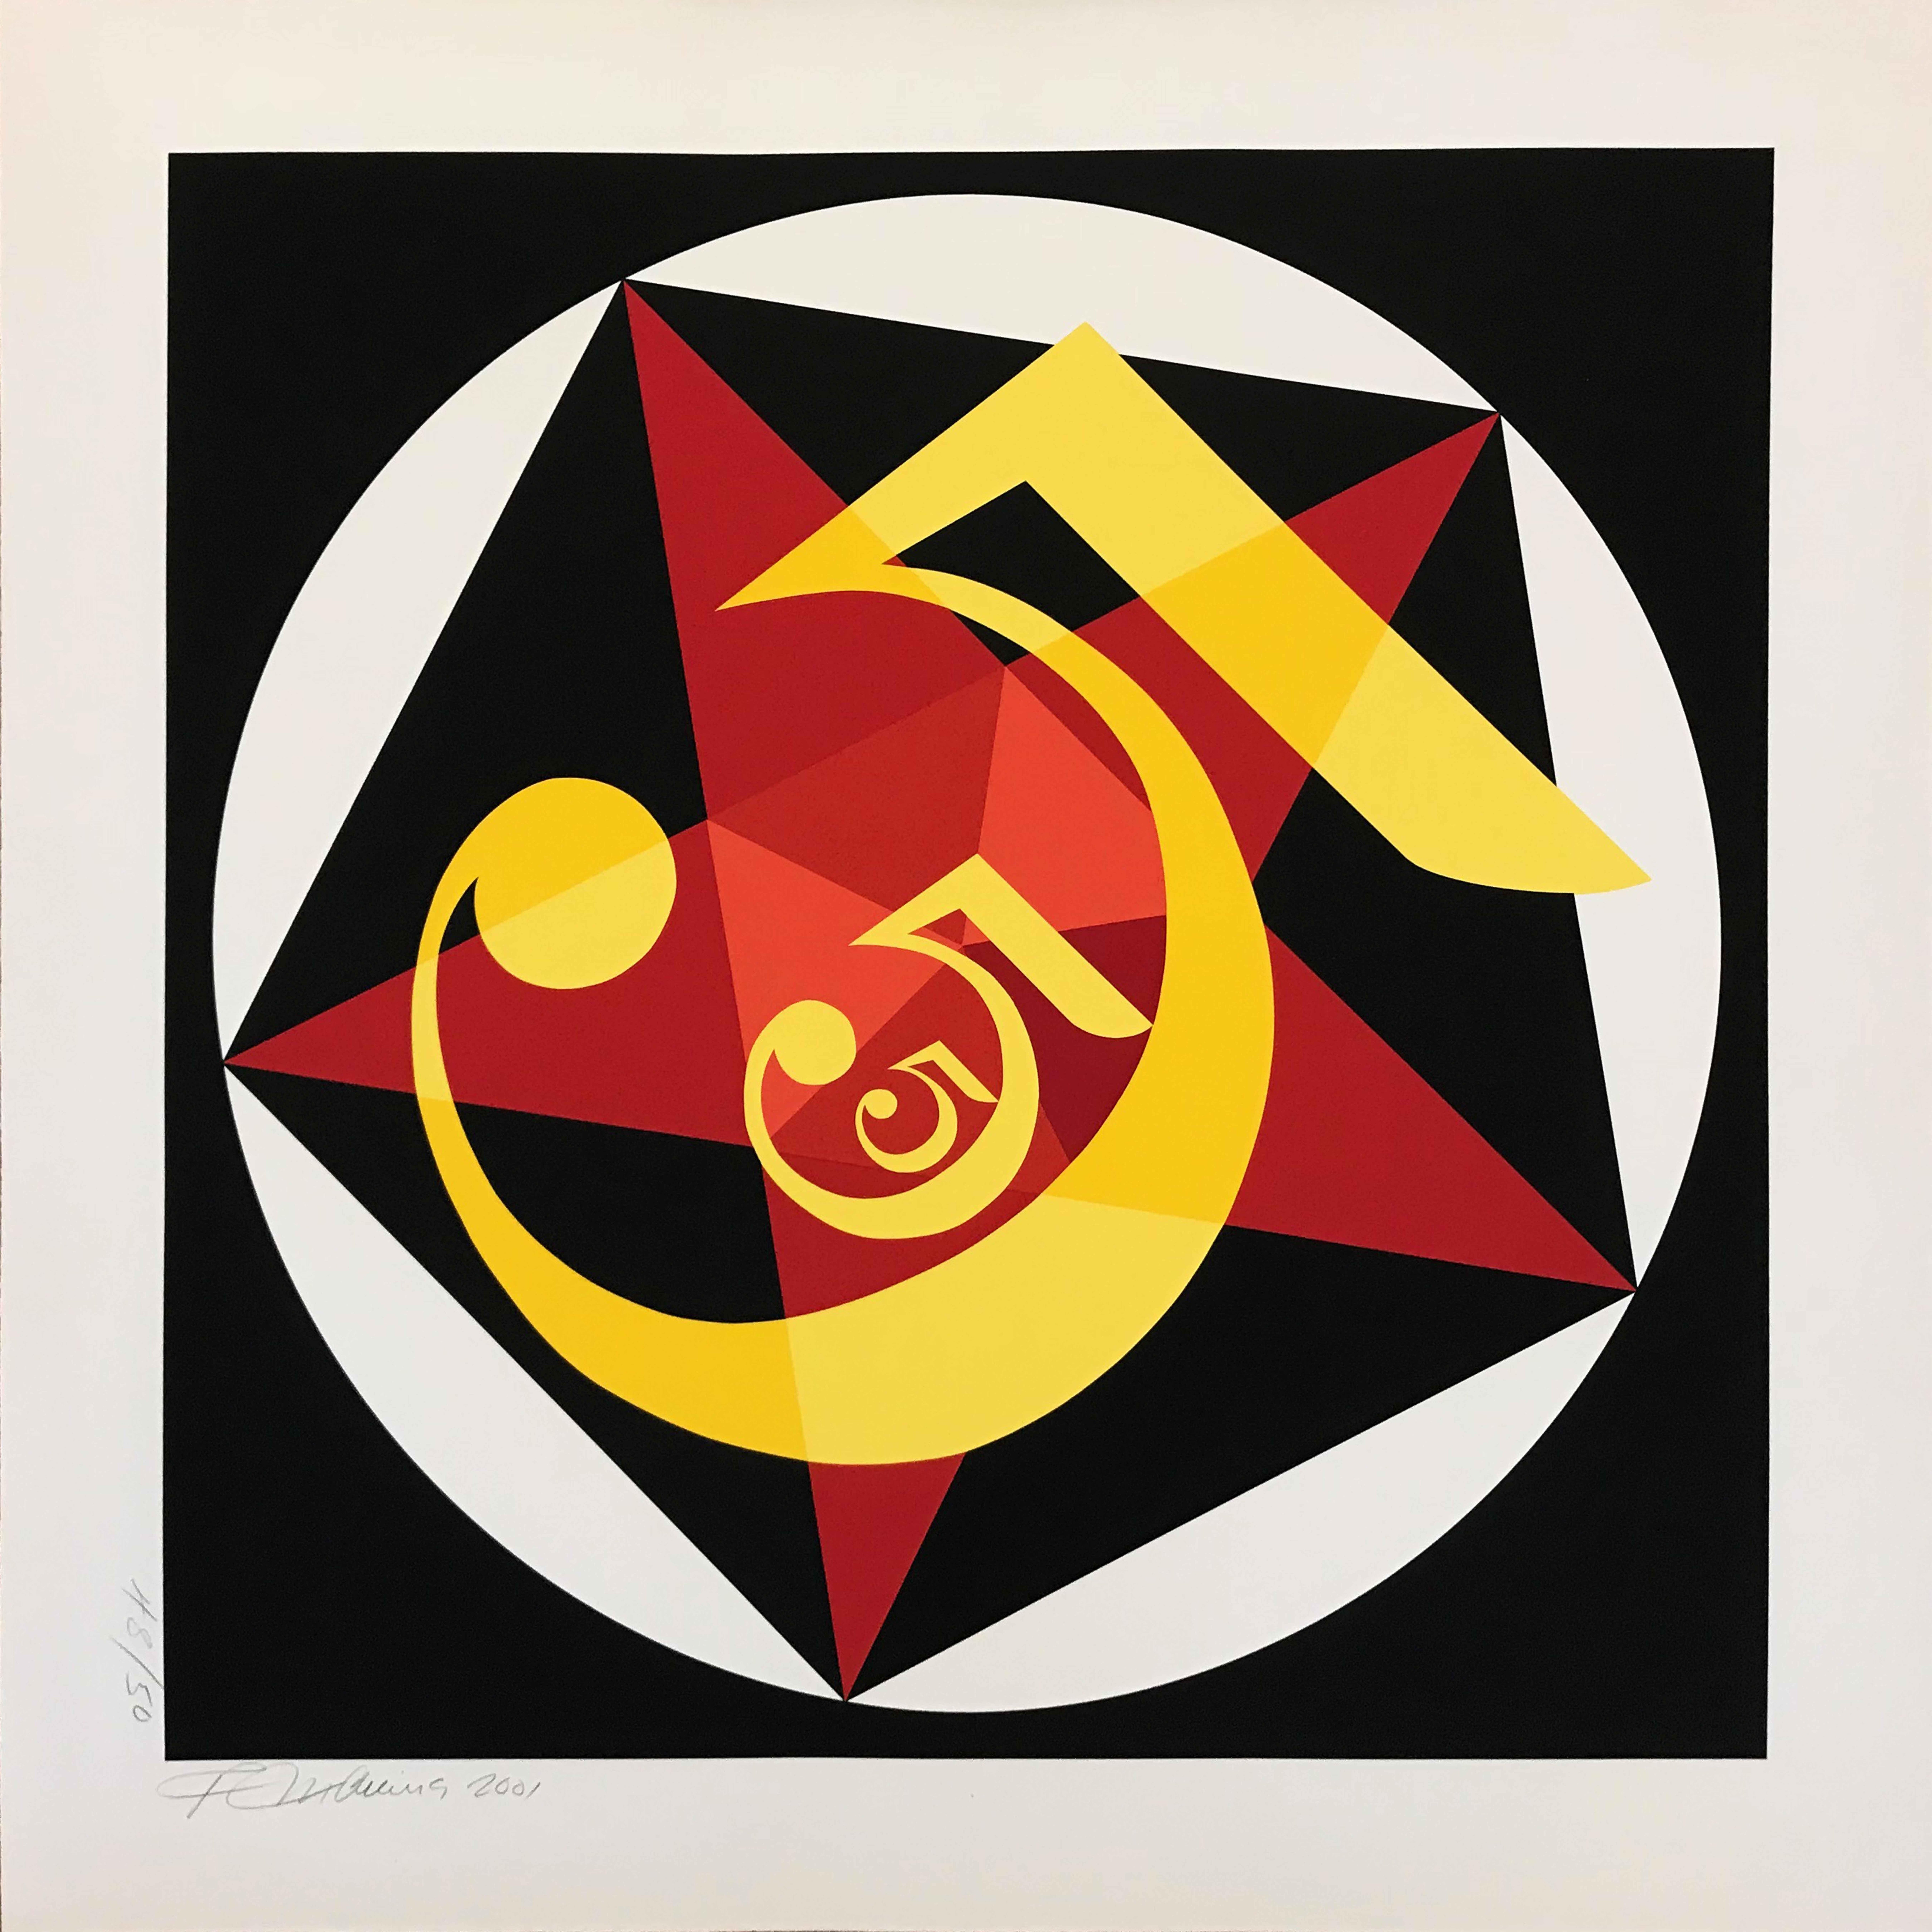 Robert Indiana
"Demuth 5"
2001; Silkscreen
36 x 36 inches
Edition of 50